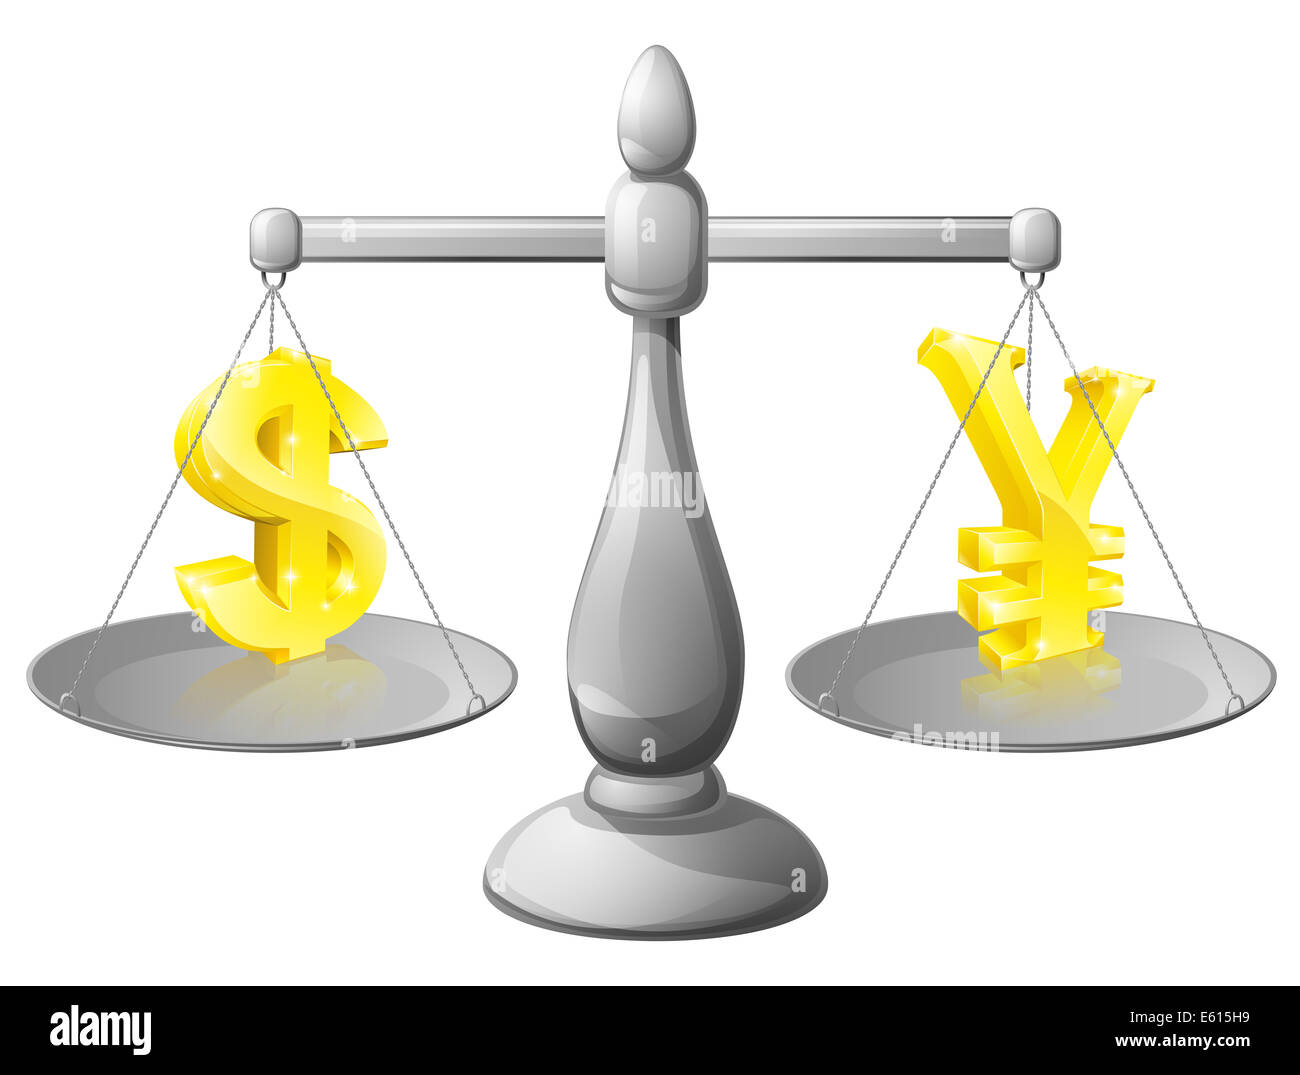 Scales currency concept, foreign exchange forex concept, dollar and Yen signs on scales being weighed against each other Stock Photo